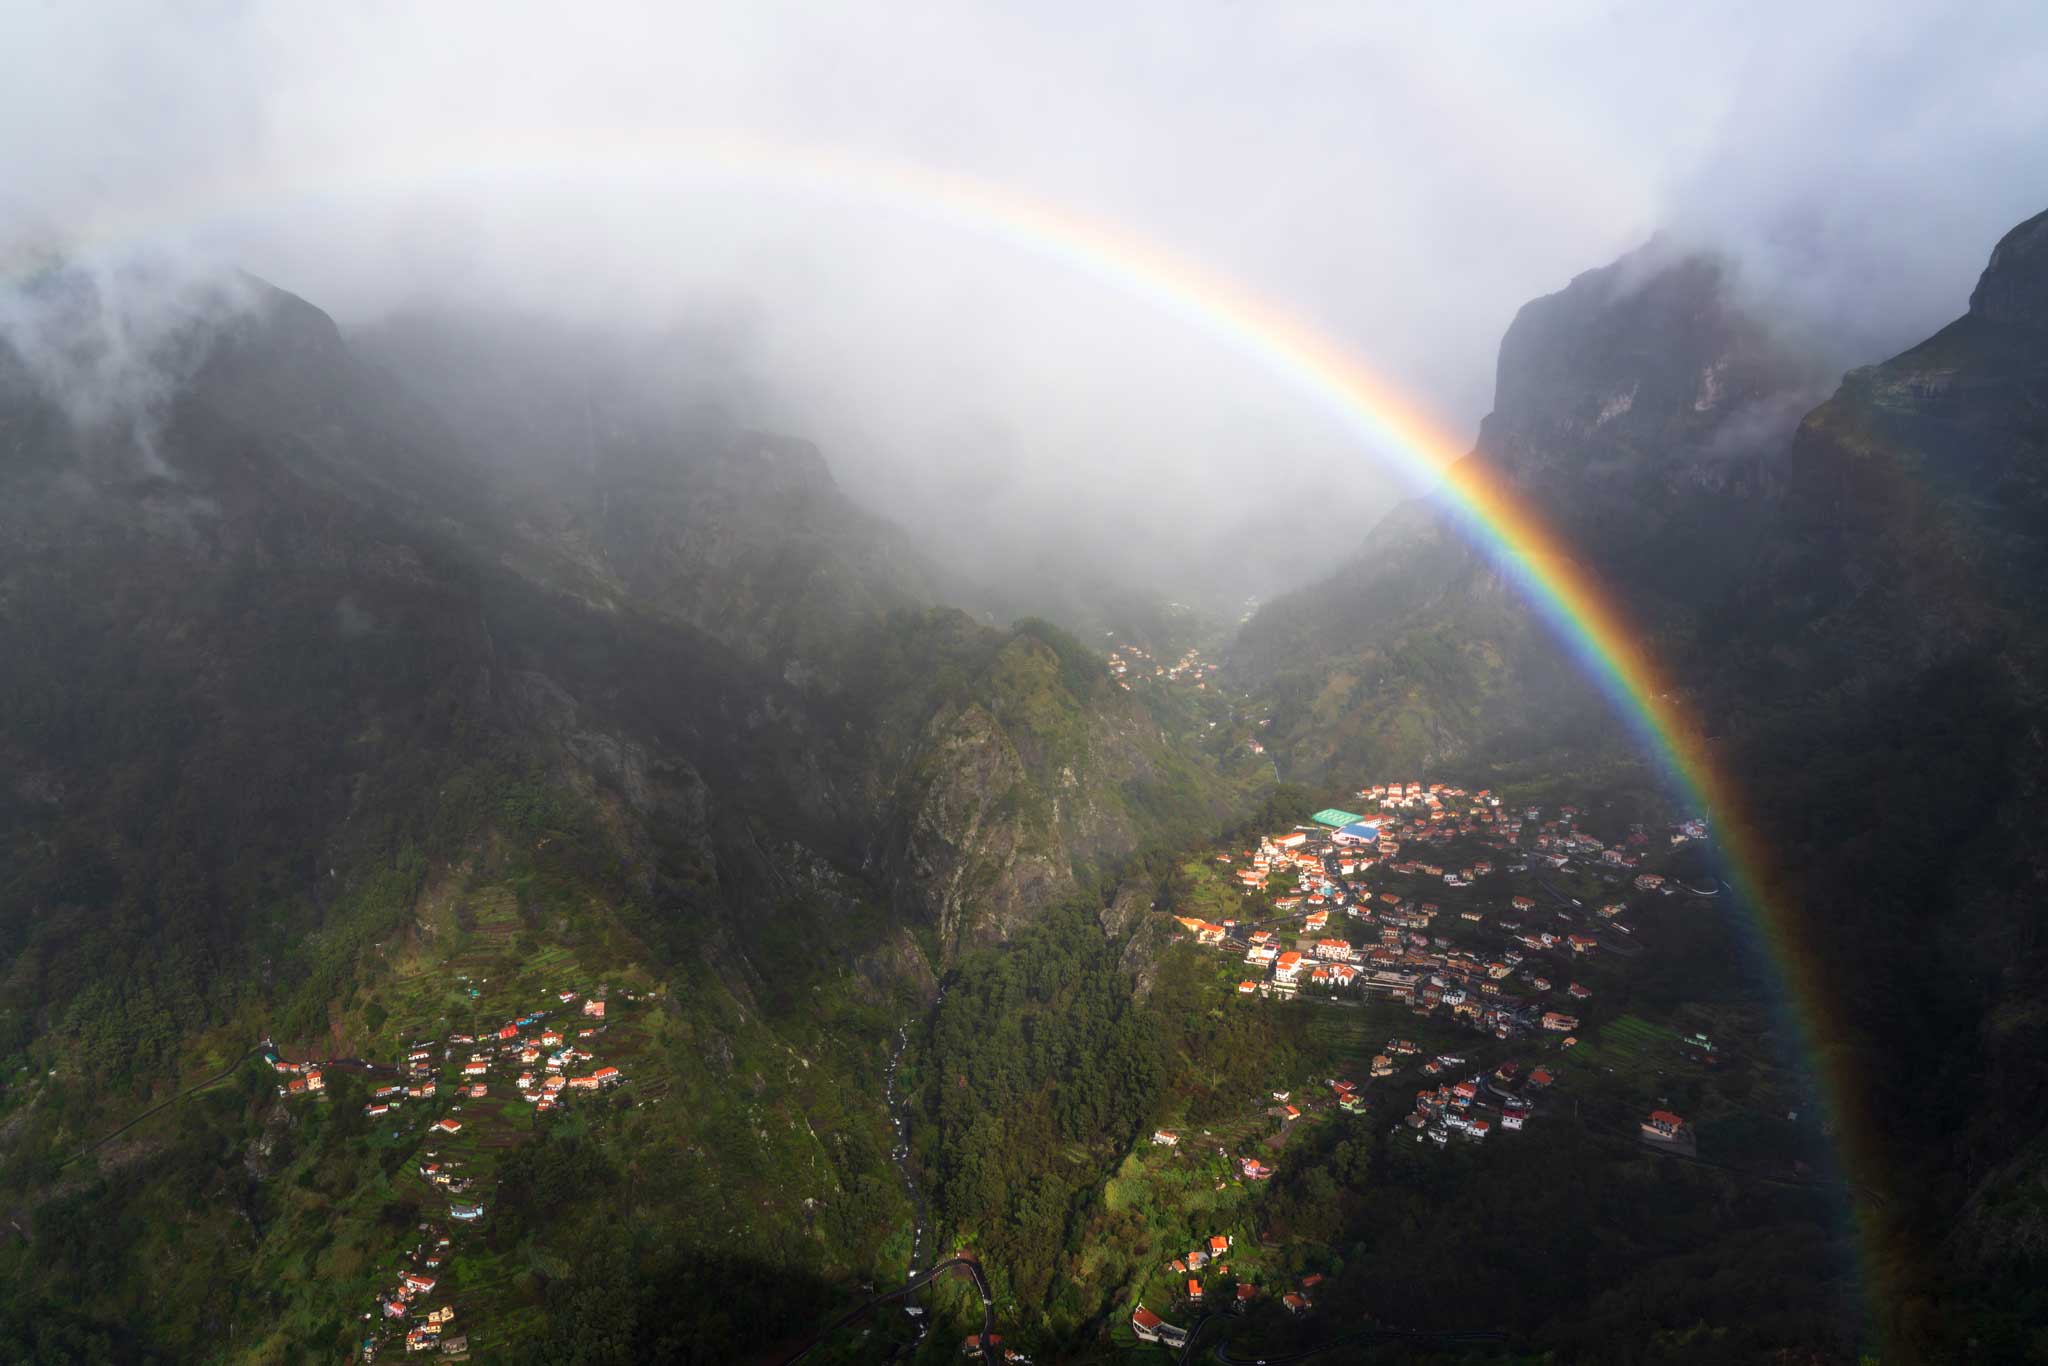 A rainbow across a mountains valley of the nuns in Madeira